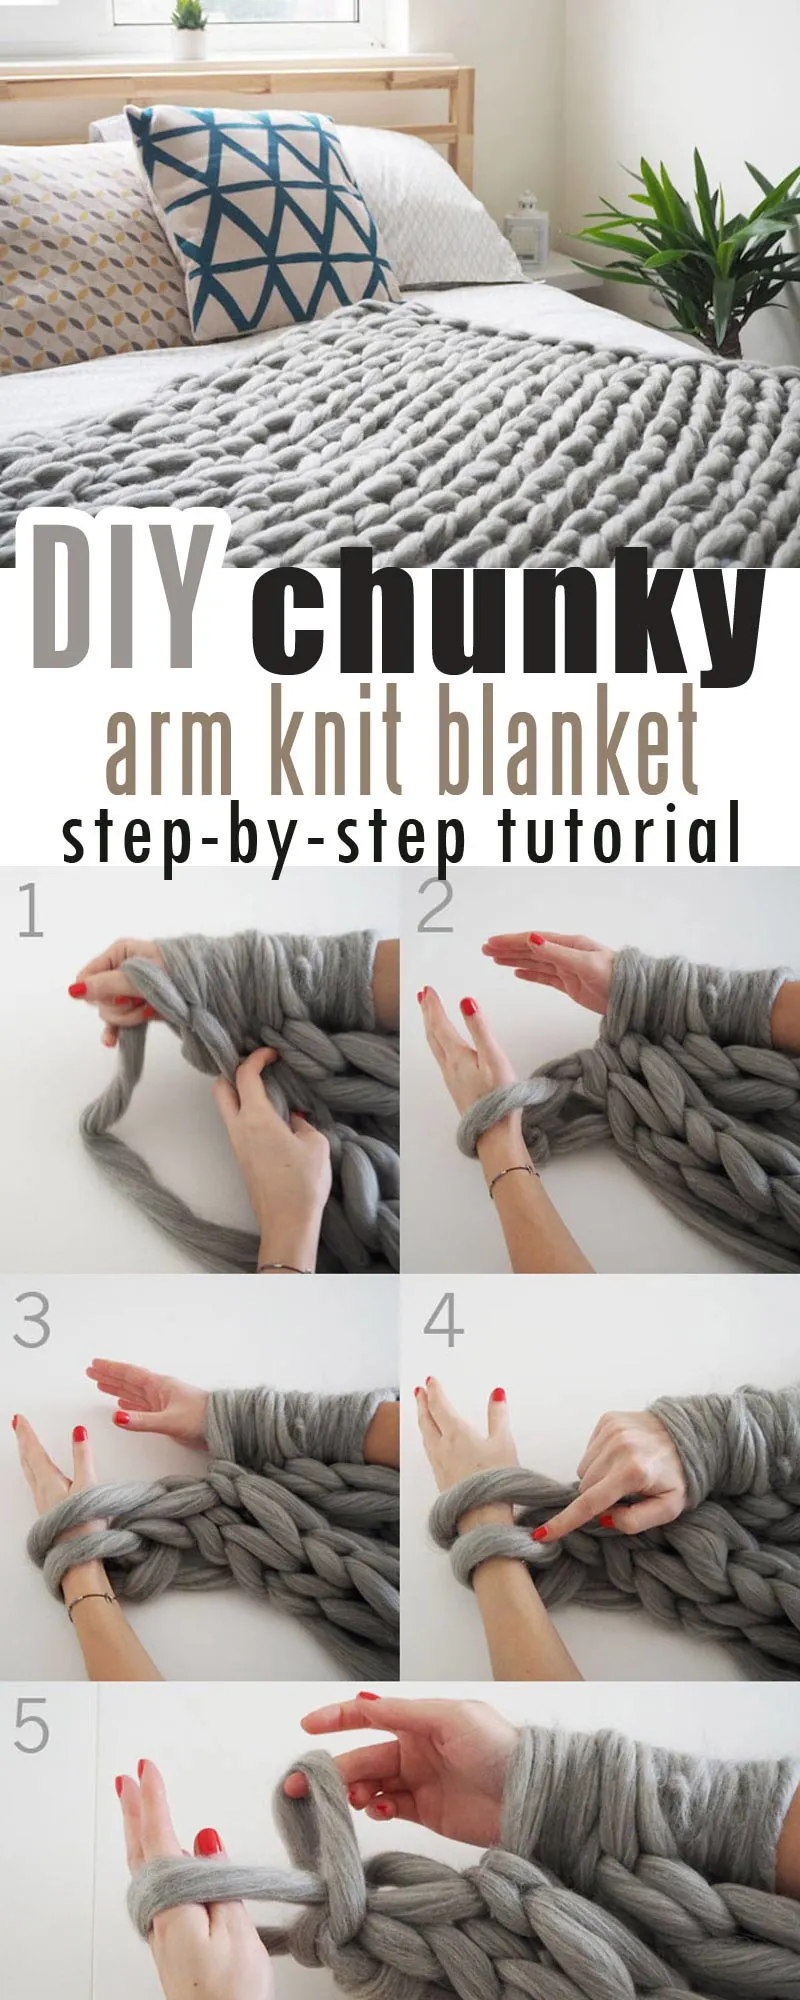 How to make a giant arm knitted blanket